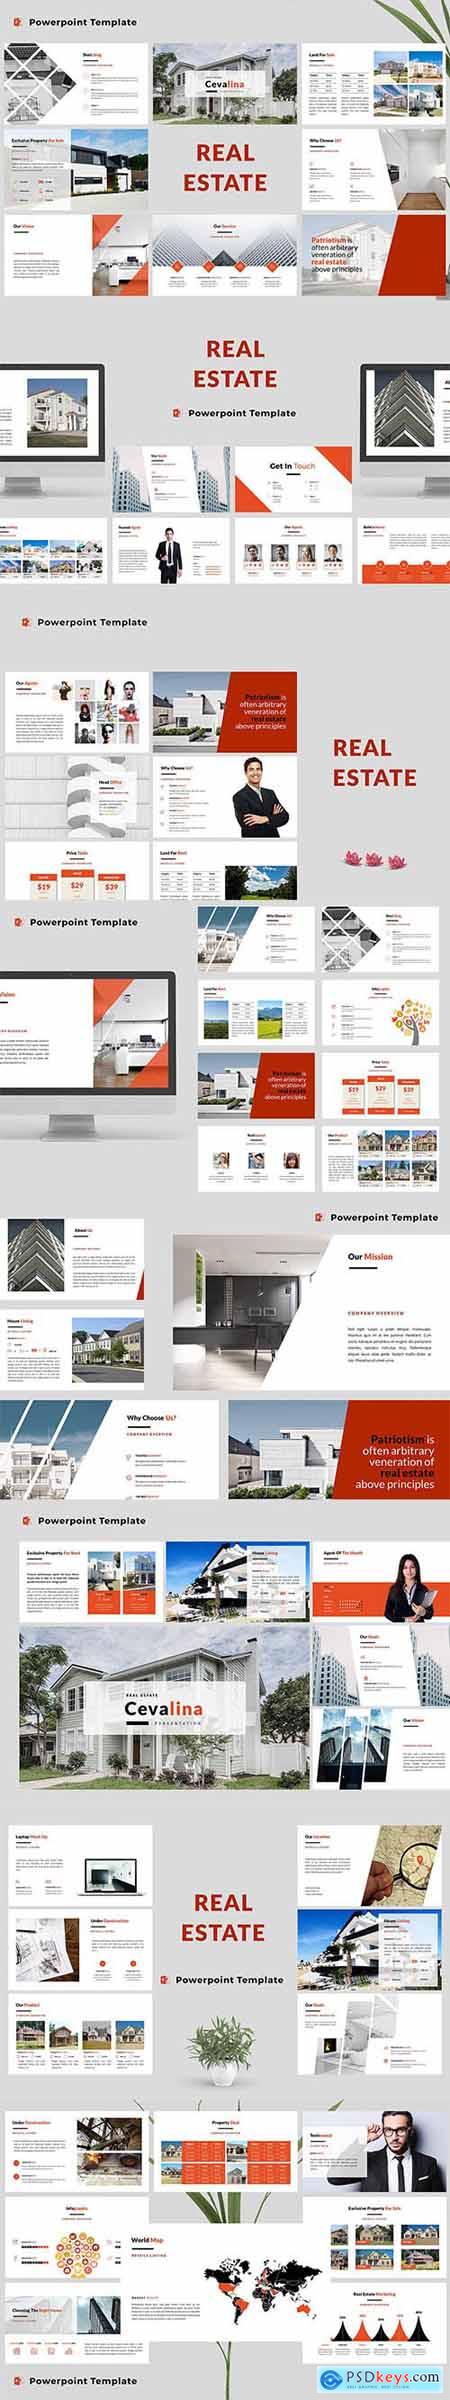 Real Estate Powerpoint Presentation Template